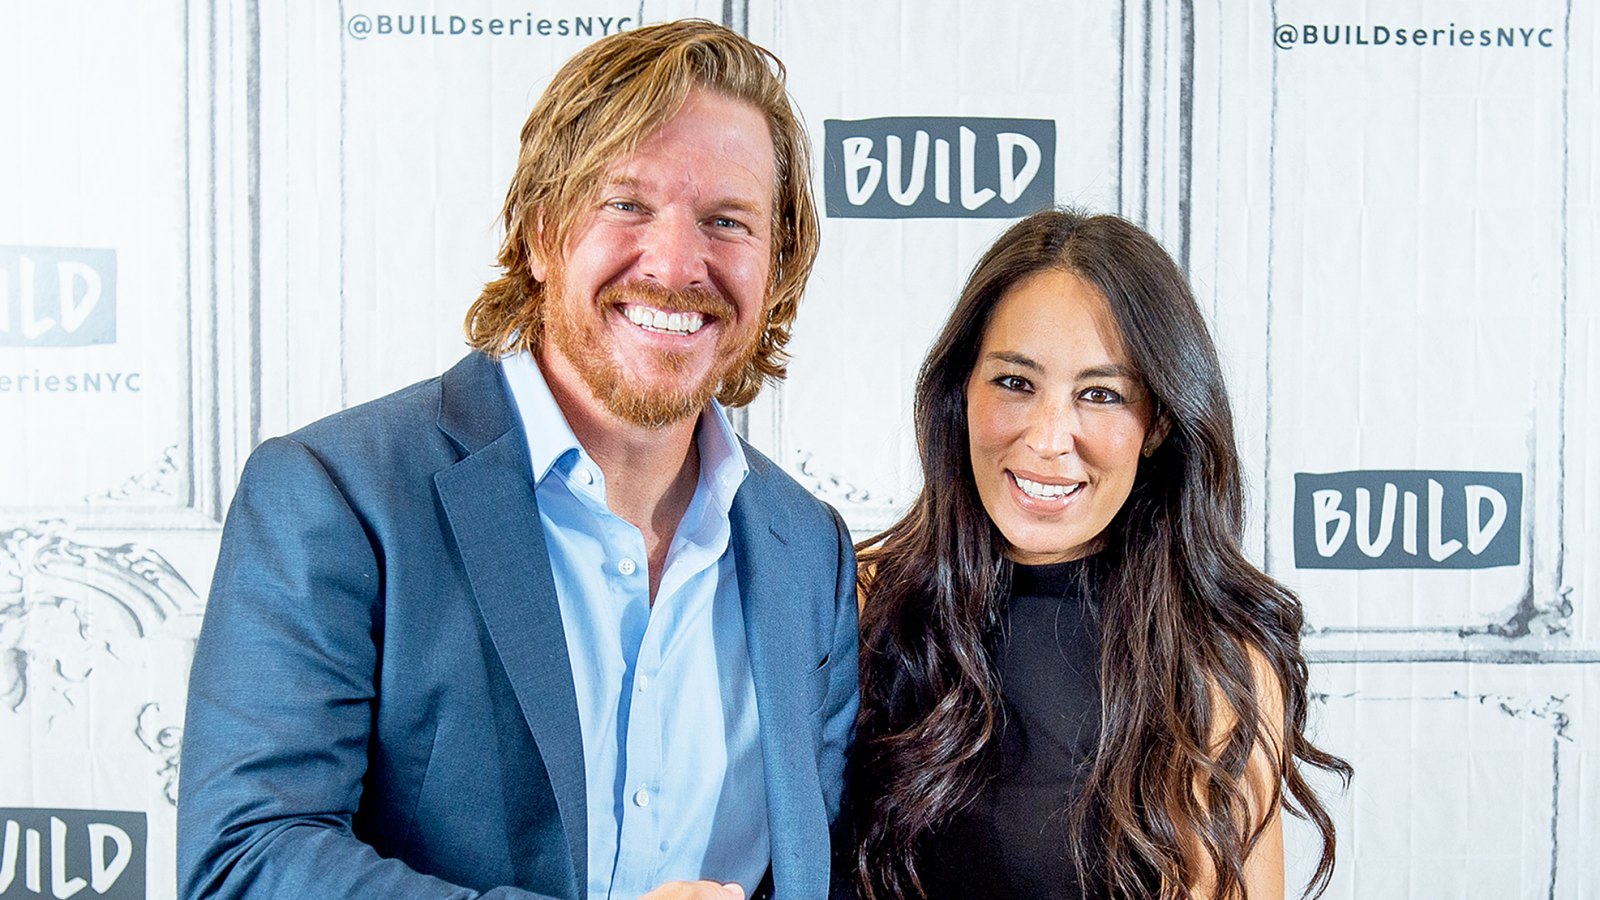 Chip and Joanna Gaines visit the Build Series at Build Studio on October 18, 2017 in New York City.